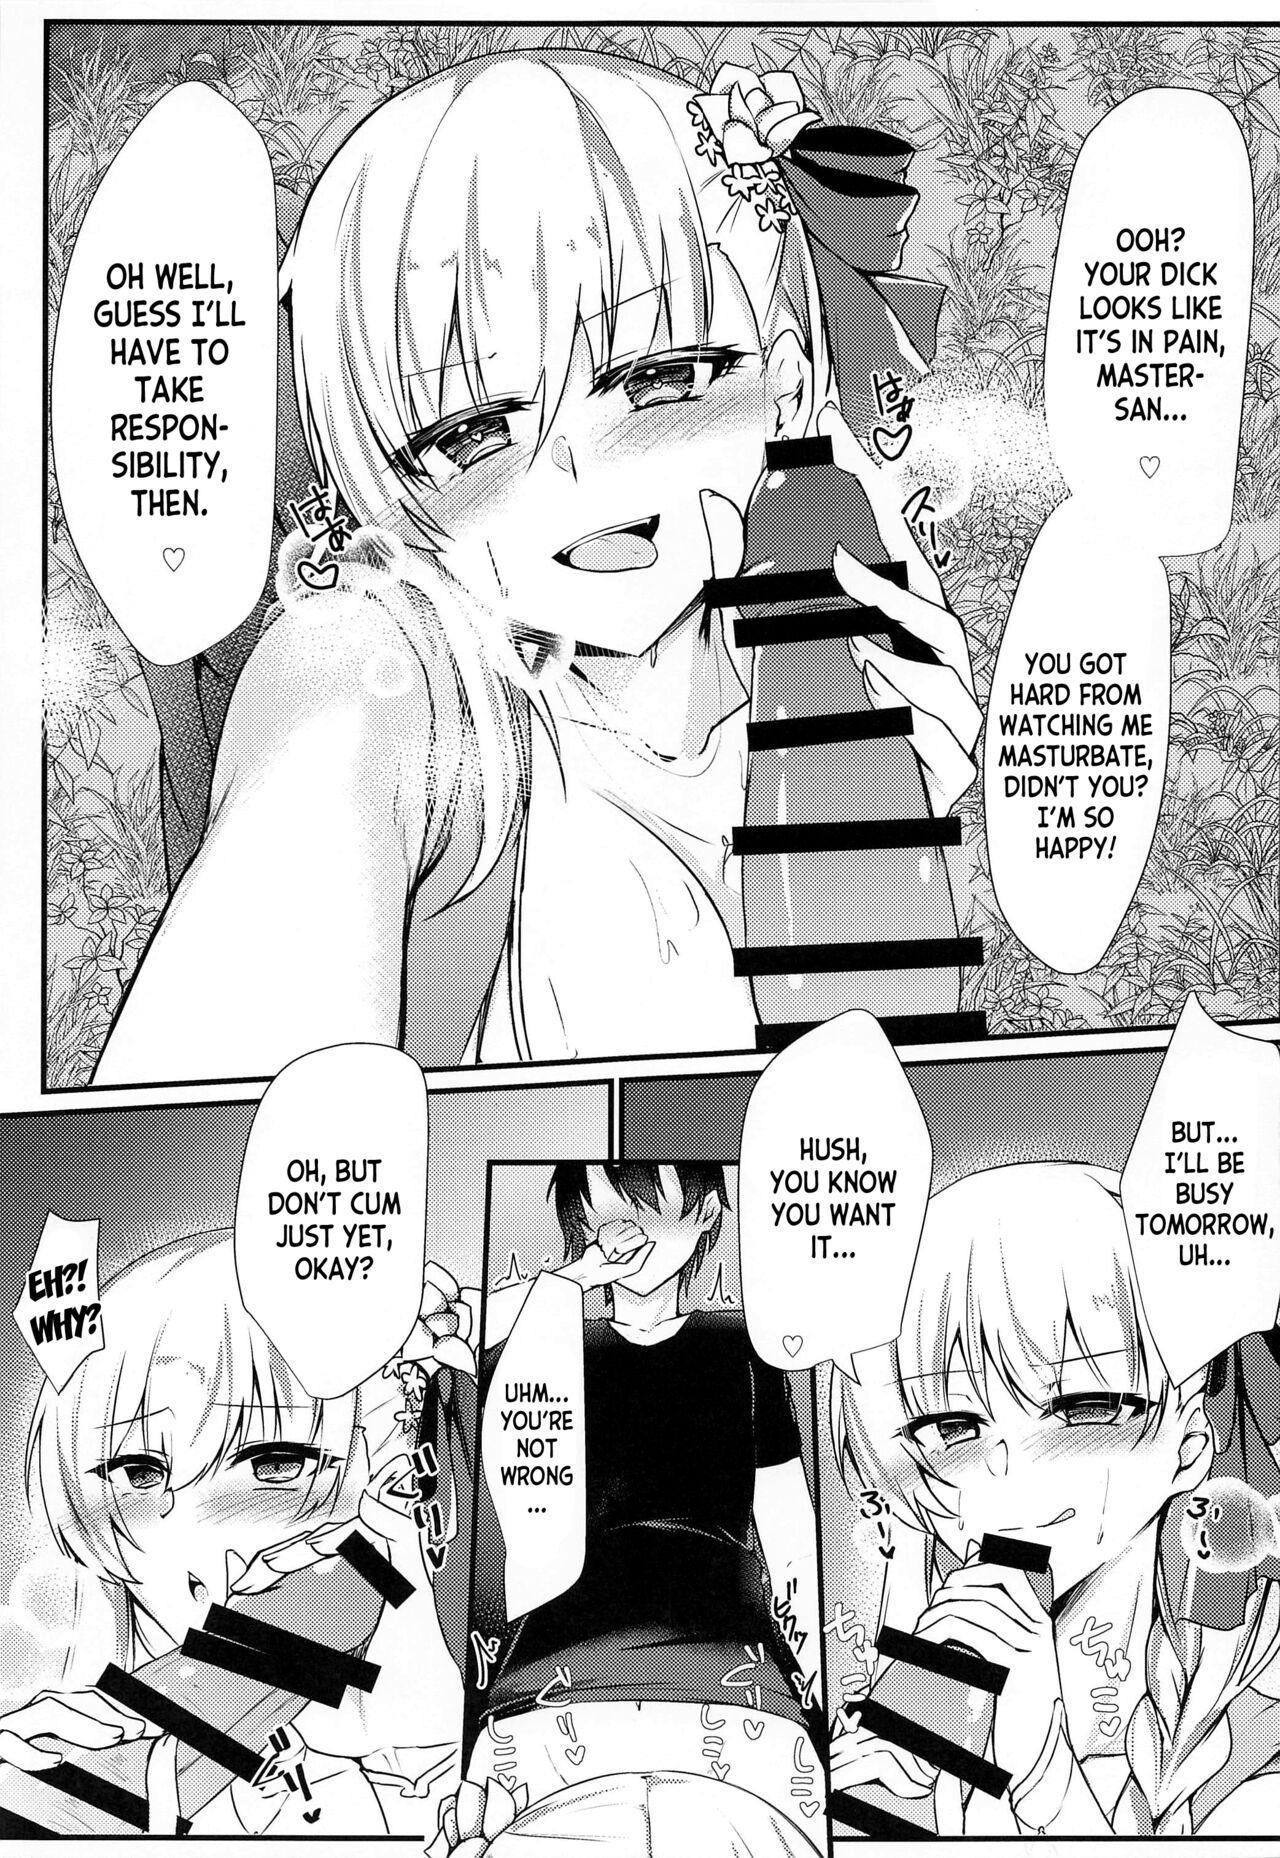 Oral Sex Maou-sama wa Jouyoku o Osaerarenai | The Demon King Can't Control Her Lust - Fate grand order Best Blowjob - Page 10